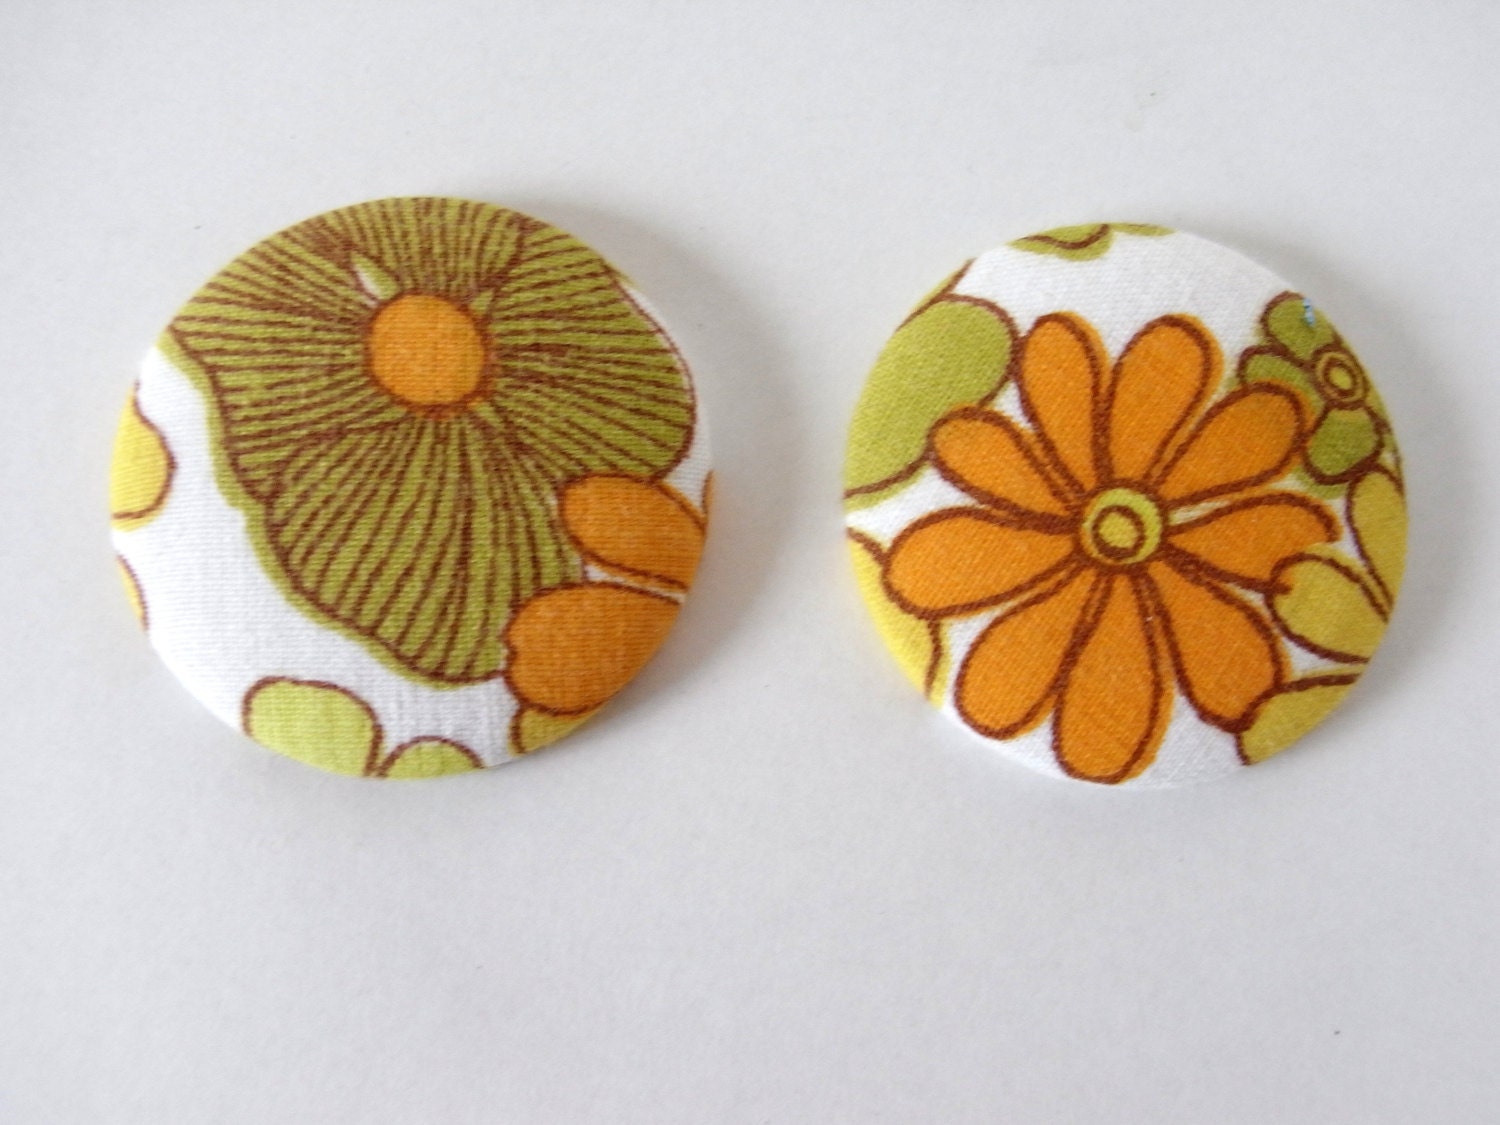 Big Vintage Retro Daisy Fabric covered buttons x 2 - craft supply